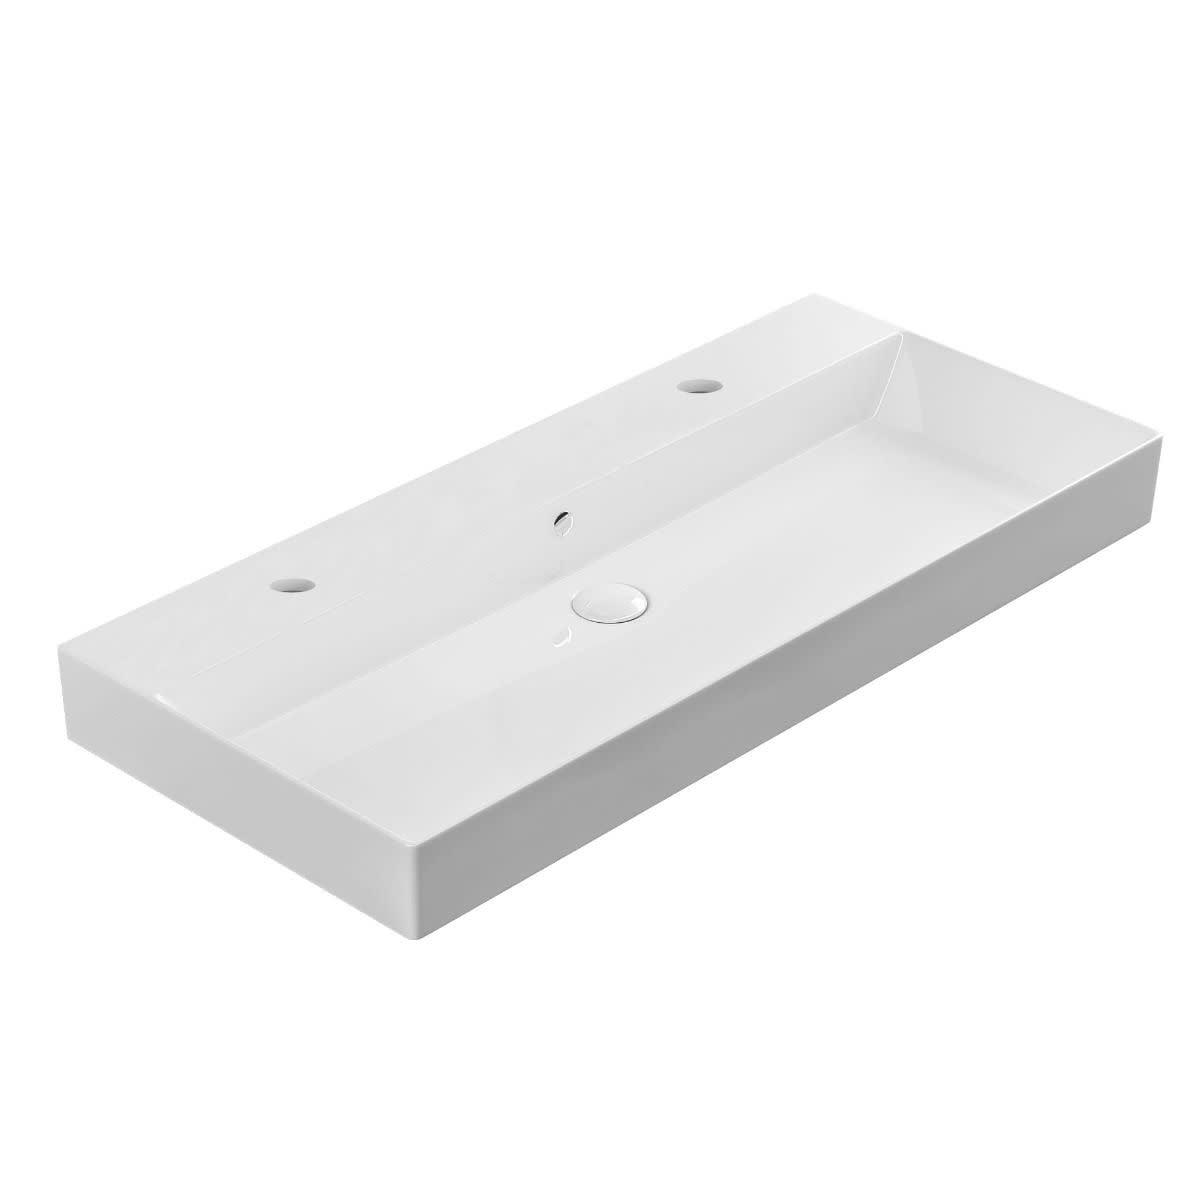 Energy 38-5/8" Gloss White Ceramic Wall Mounted Sink